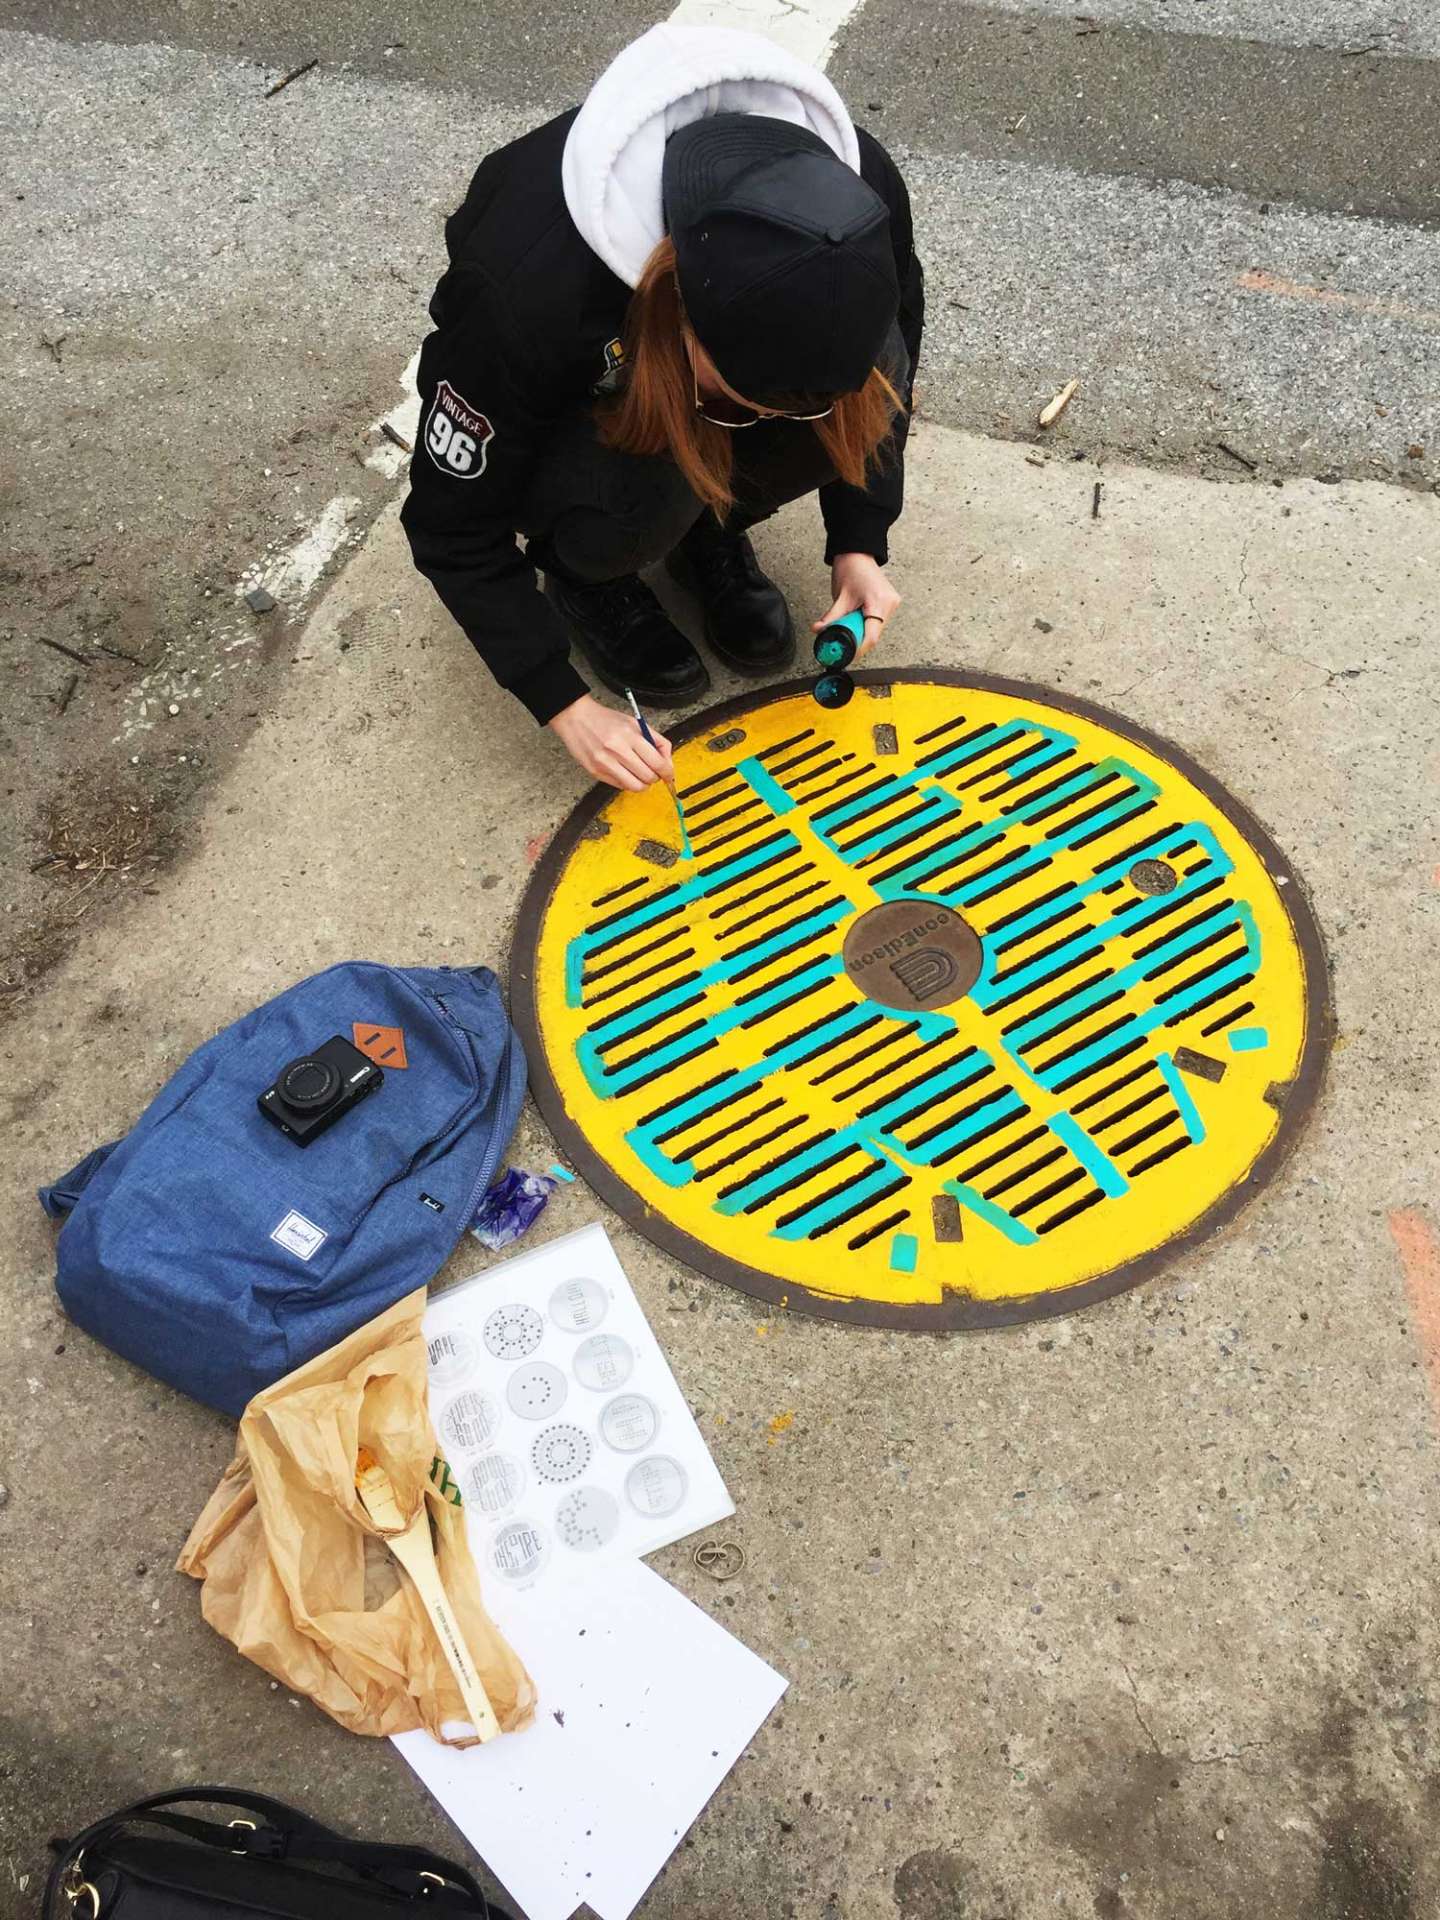 ◯ PAINTING DRAIN COVERS IN NYC ◯